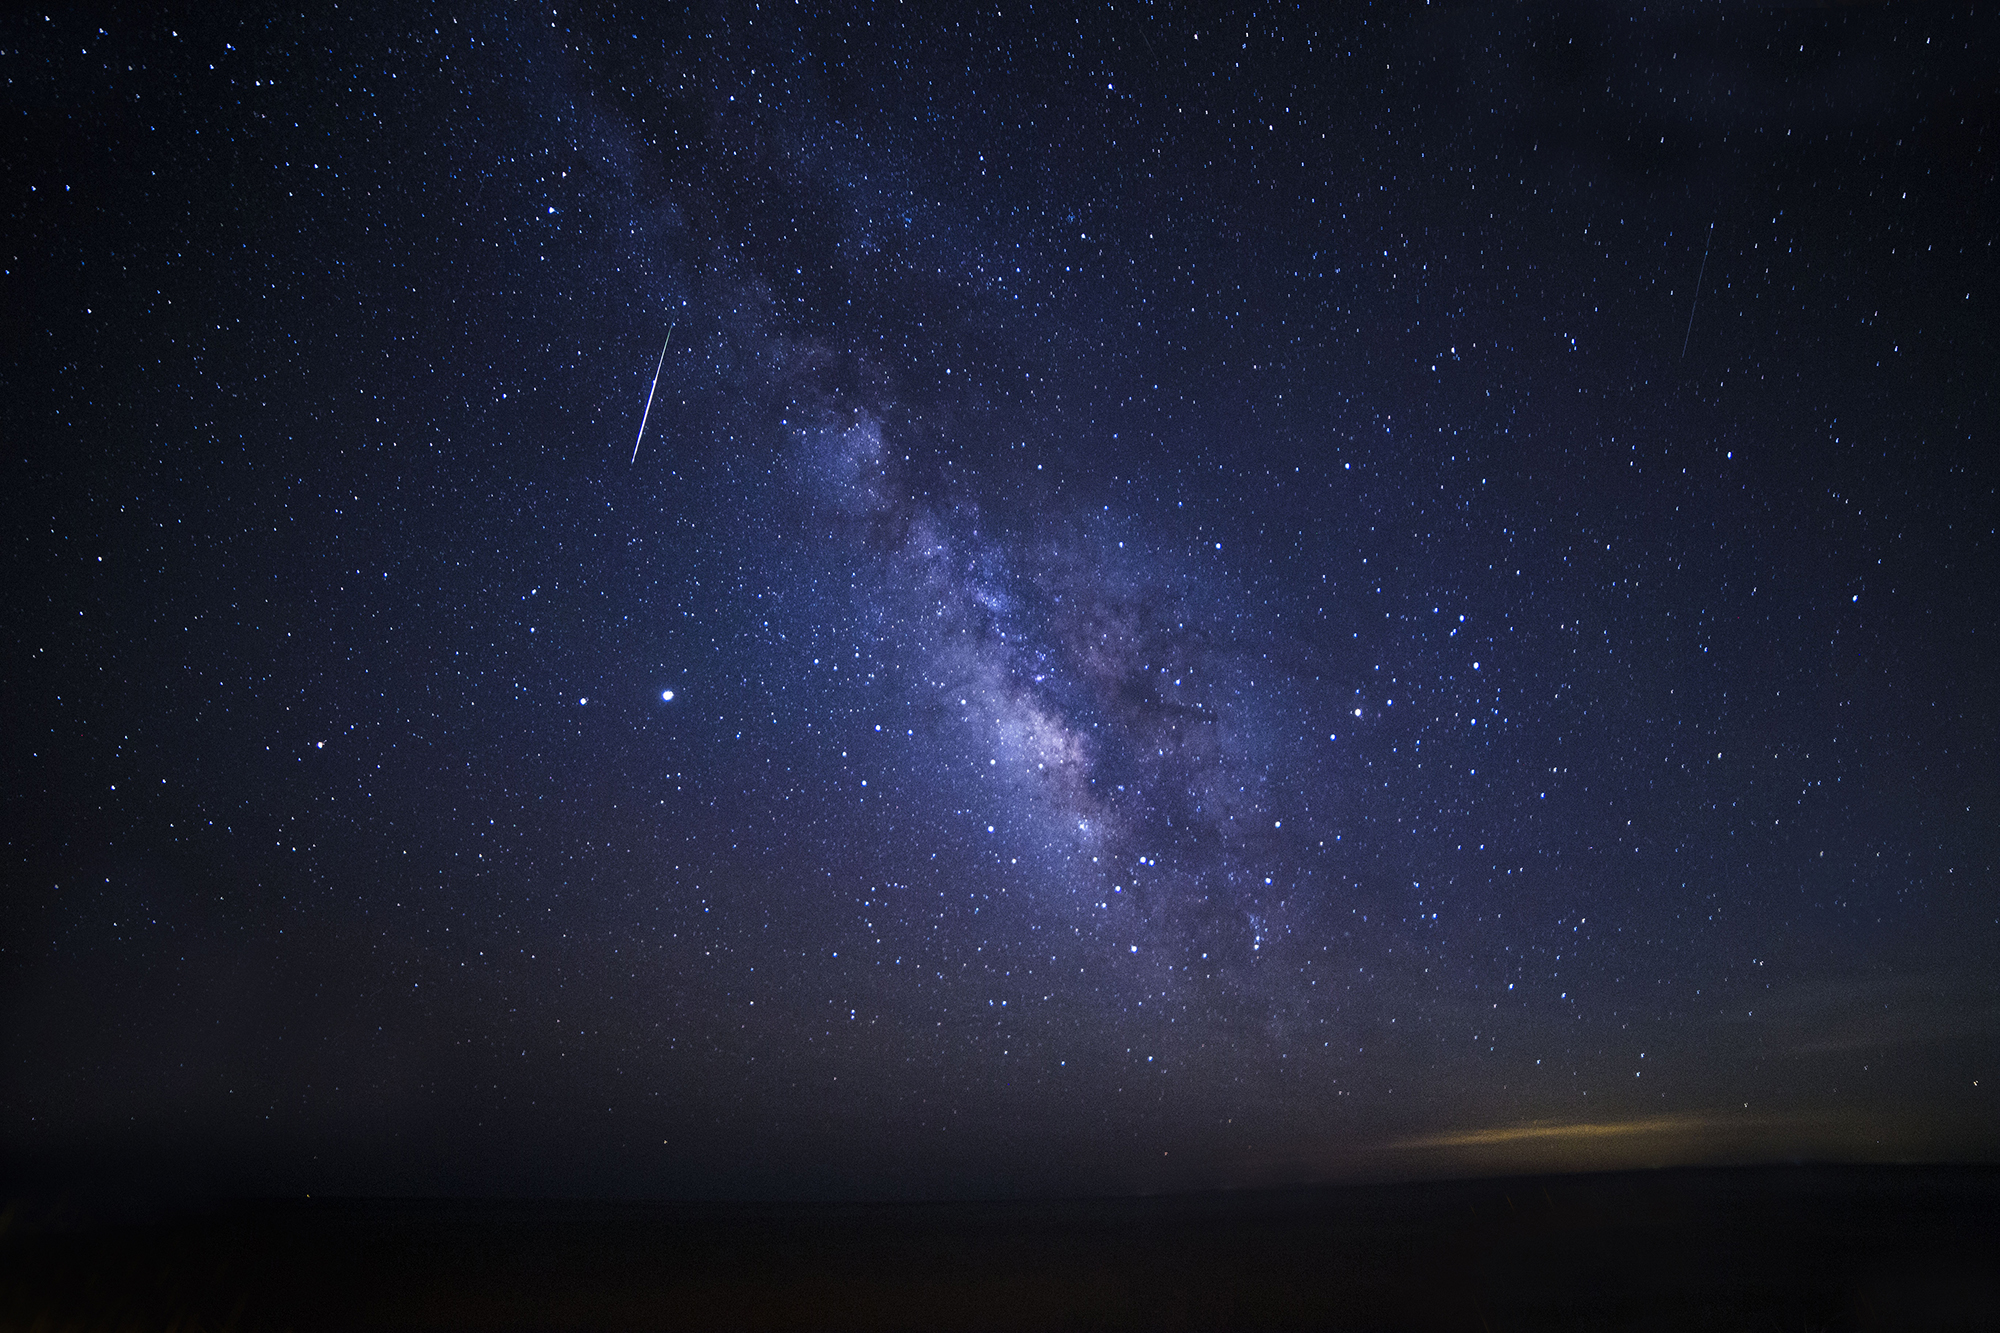 A Lyrid meteor travels the Milky Way in this photo taken by Tina Pappas Lee on Fripp Island, South Carolina.  The photo was shot around 4:45 am local time on April 22, 2020.